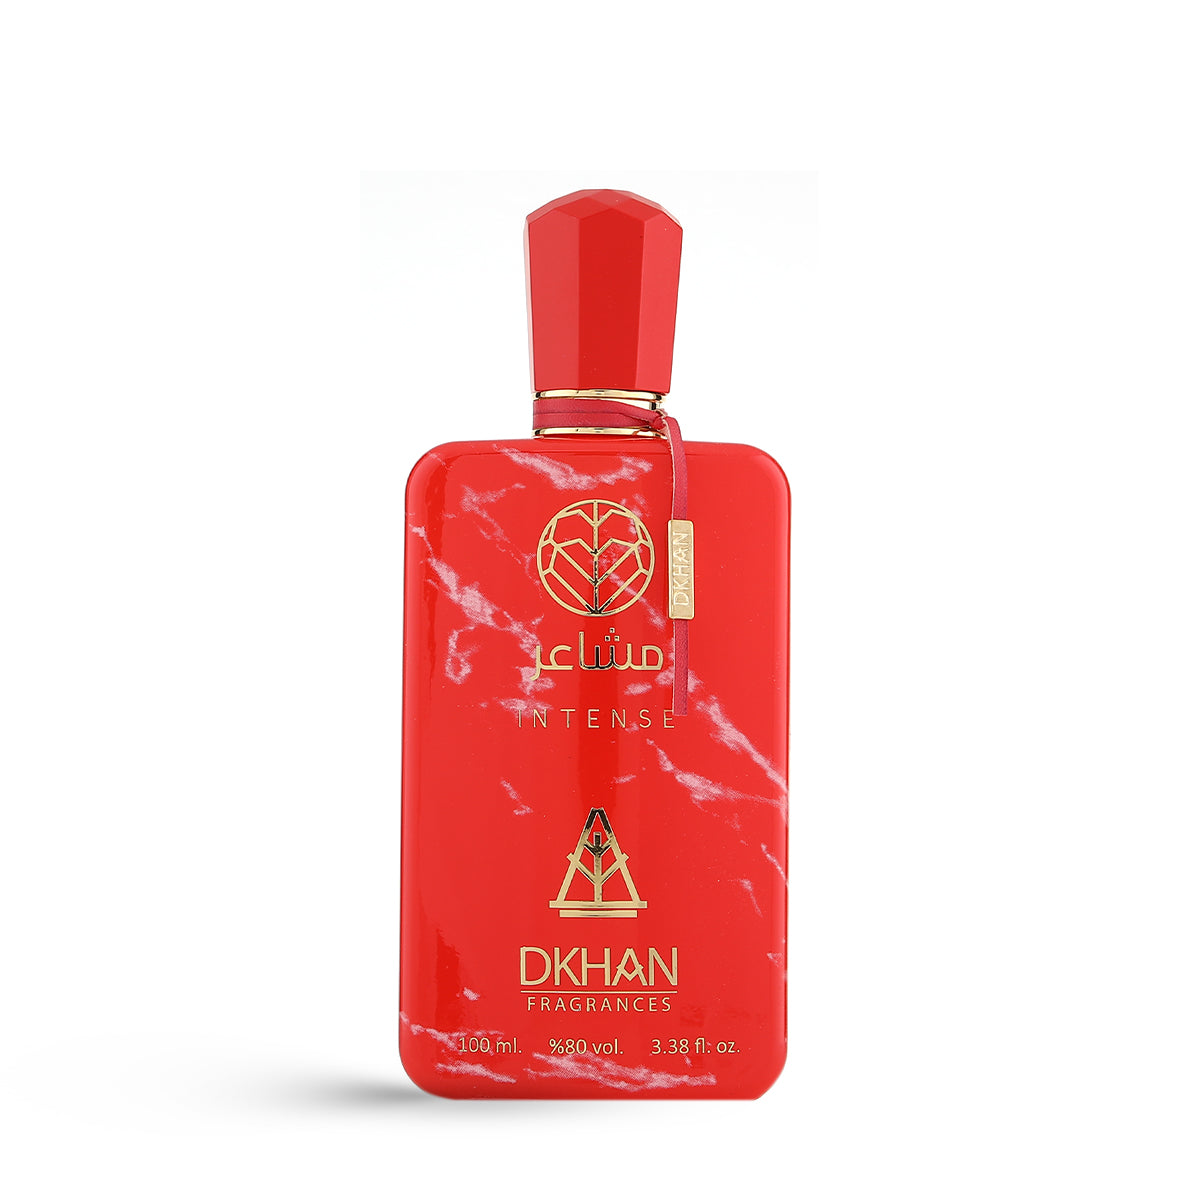 This is an image of a bold red perfume bottle with white marble-like patterns. The bottle has a geometrically shaped cap and a gold-colored label attached to the front. The label features the word "club" in lowercase letters followed by "INTENSE" in uppercase. Below, there is a logo comprising a heart inside a diamond shape and the text "DKHAN FRAGRANCES." 